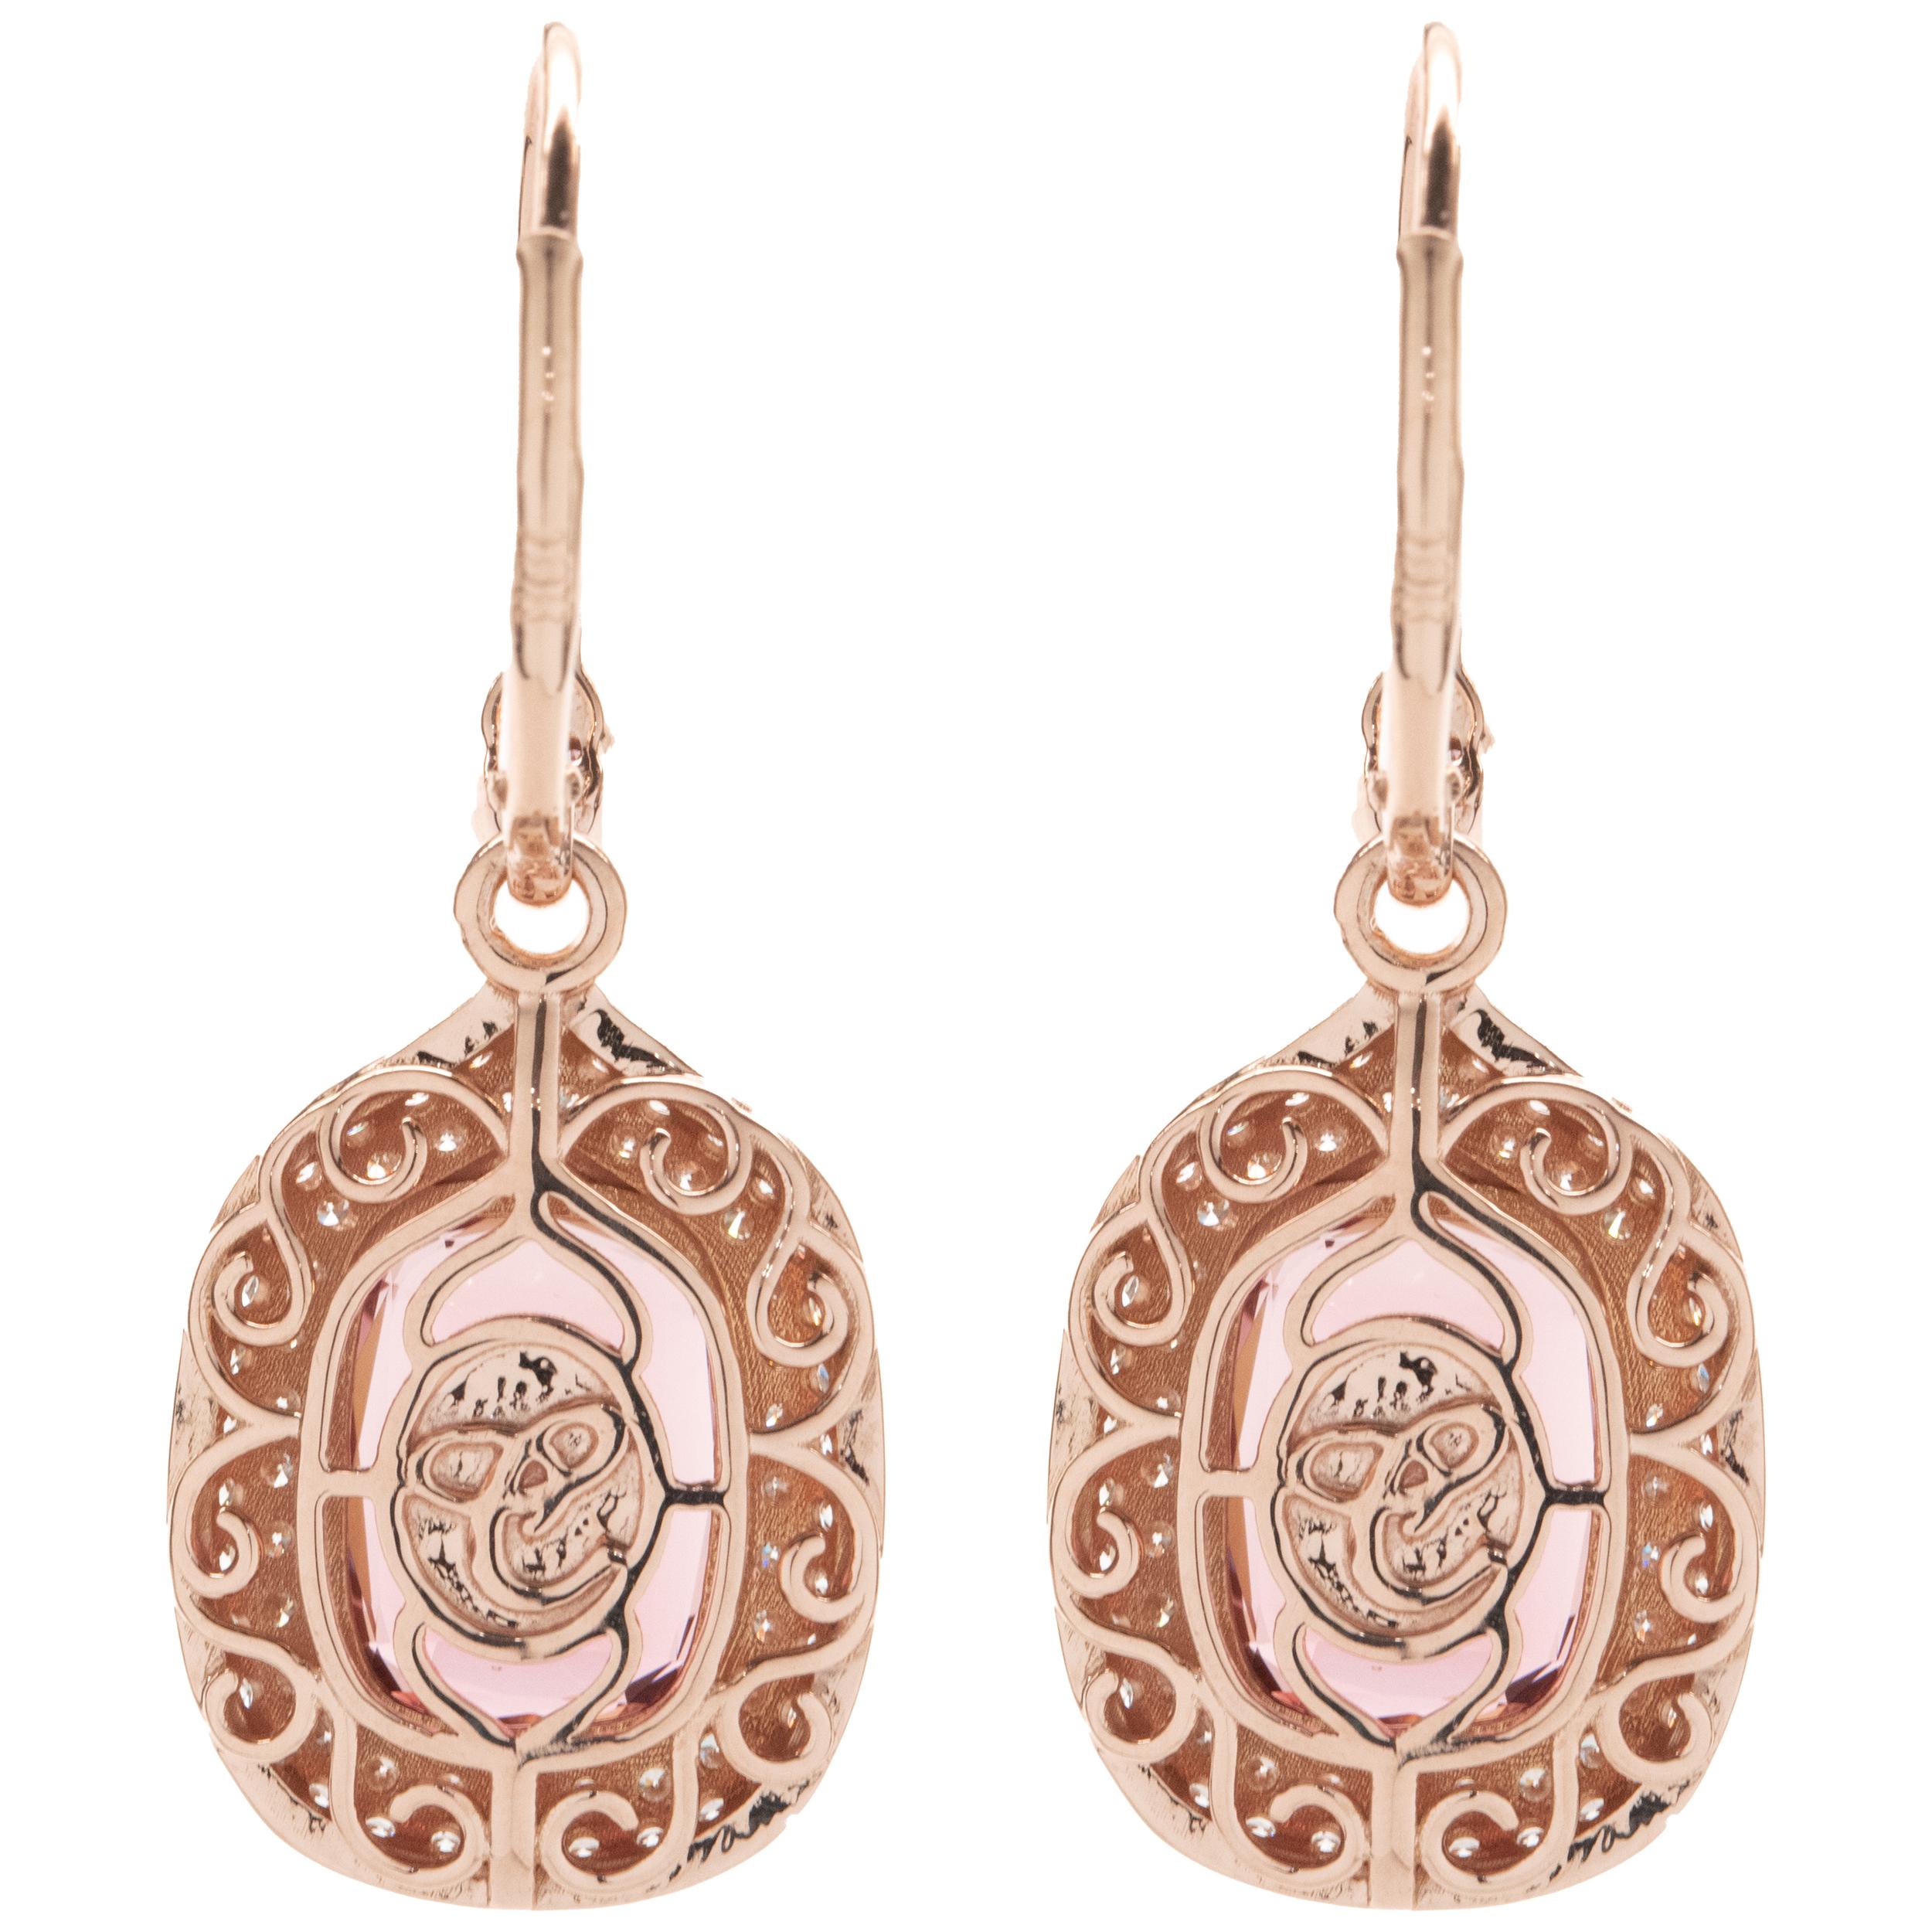 Designer: custom
Material: 18K rose gold
Diamond: 126 round brilliant cut  = 1.34cttw
Color: G
Clarity: VS2
Tourmaline: 2 cushion cut = 8.50cttw 
Dimensions: earrings measure 37.5mm in length
Fastenings: lever backs
Weight: 9.17 grams